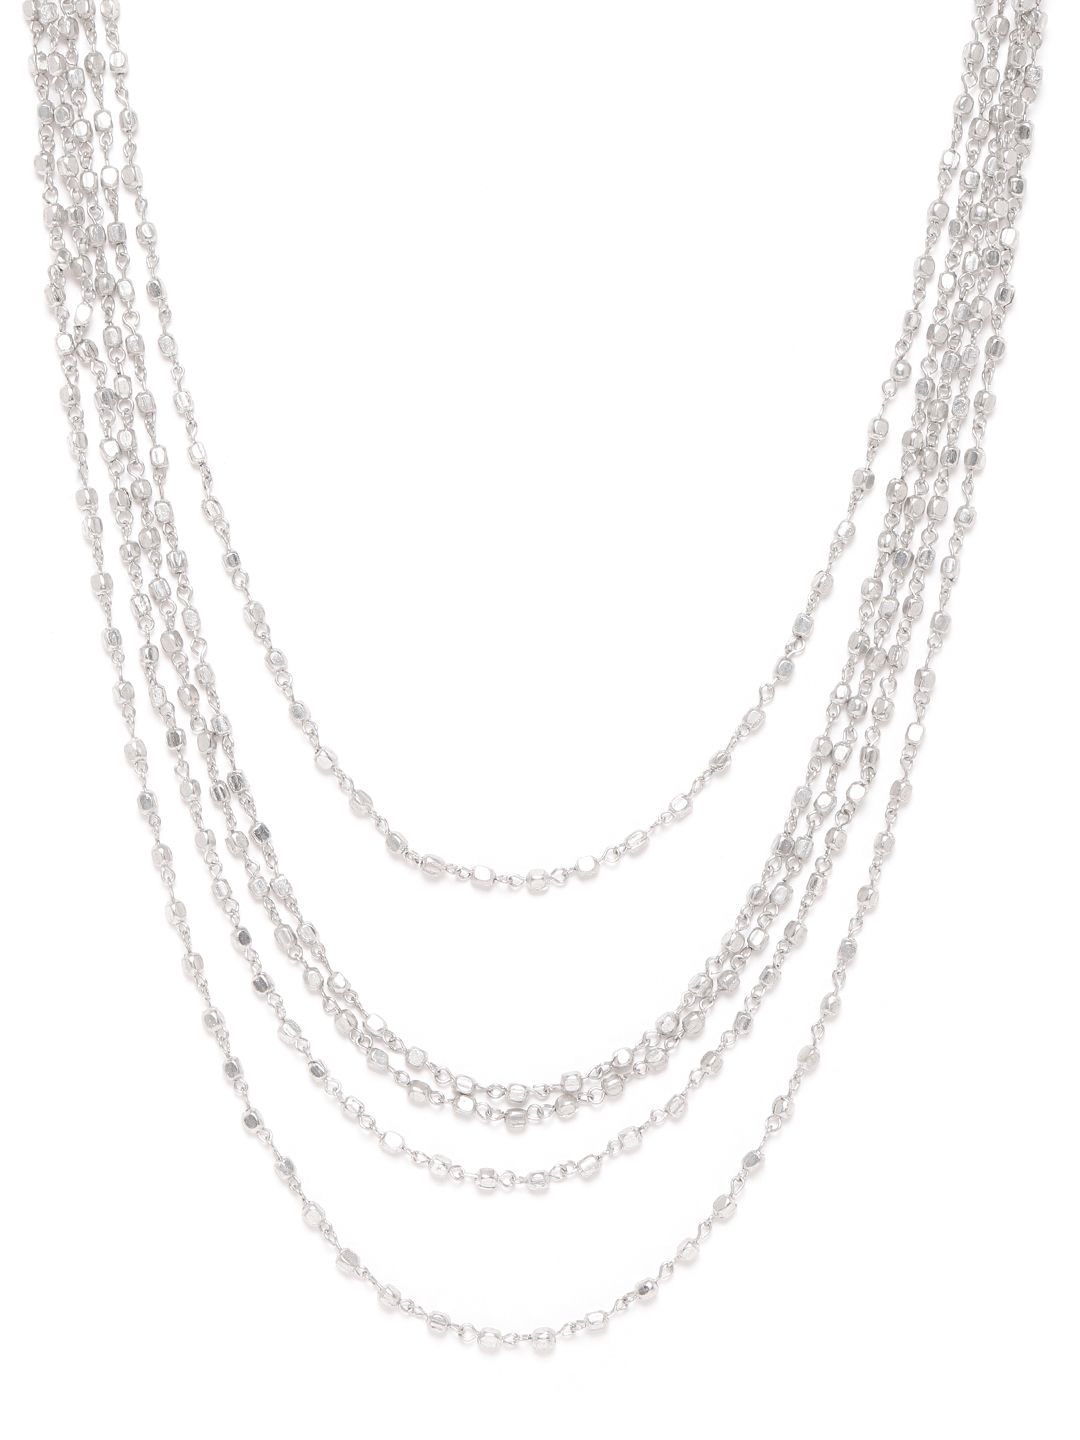 RICHEERA Silver-Plated Layered Necklace Price in India